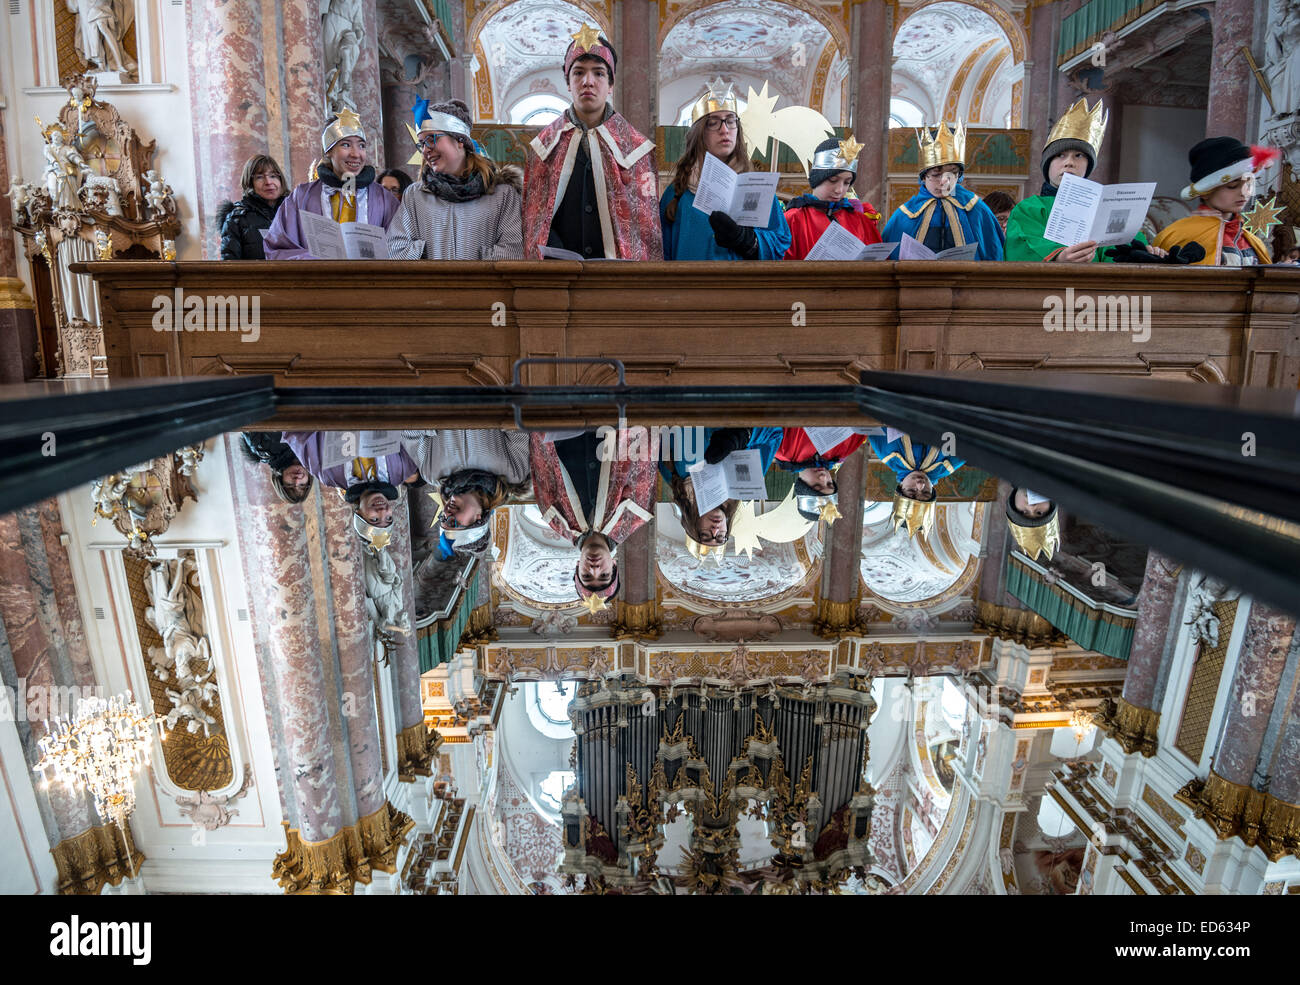 'Sternsinger' attend a service at the Klosterkirche Fuerstenfeld (Church of St. Mary's Ascension) in Fuerstenfeldbruck, Germany, 29 December 2014. The 'Sternsinger' (also known as 'Epiphany singers') stage singing processions, often holding a movable star, meant to commemorate the arrival of the Biblical Magi. The service in Furstenfeldbruck marked the start of 'Sternsinger' events. PHOTO: NICOLAS ARMER/dpa Stock Photo